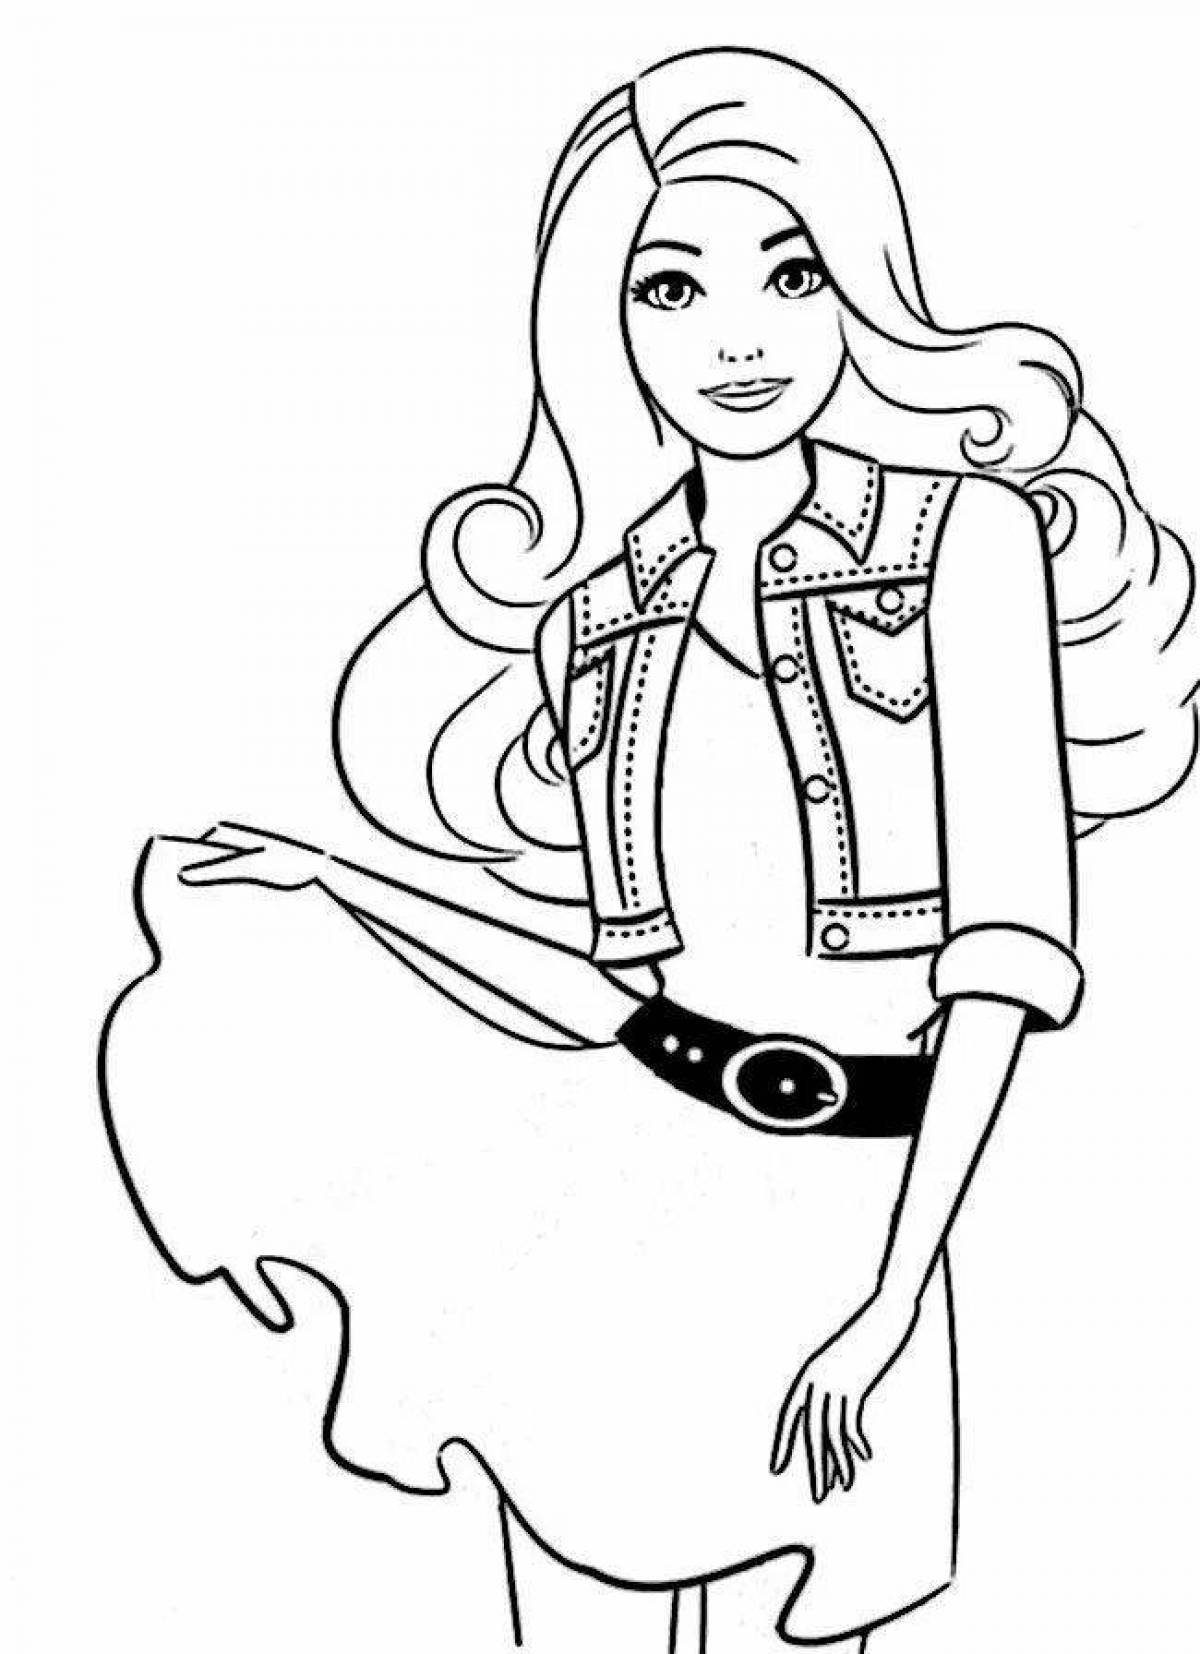 Charming barbie coloring book